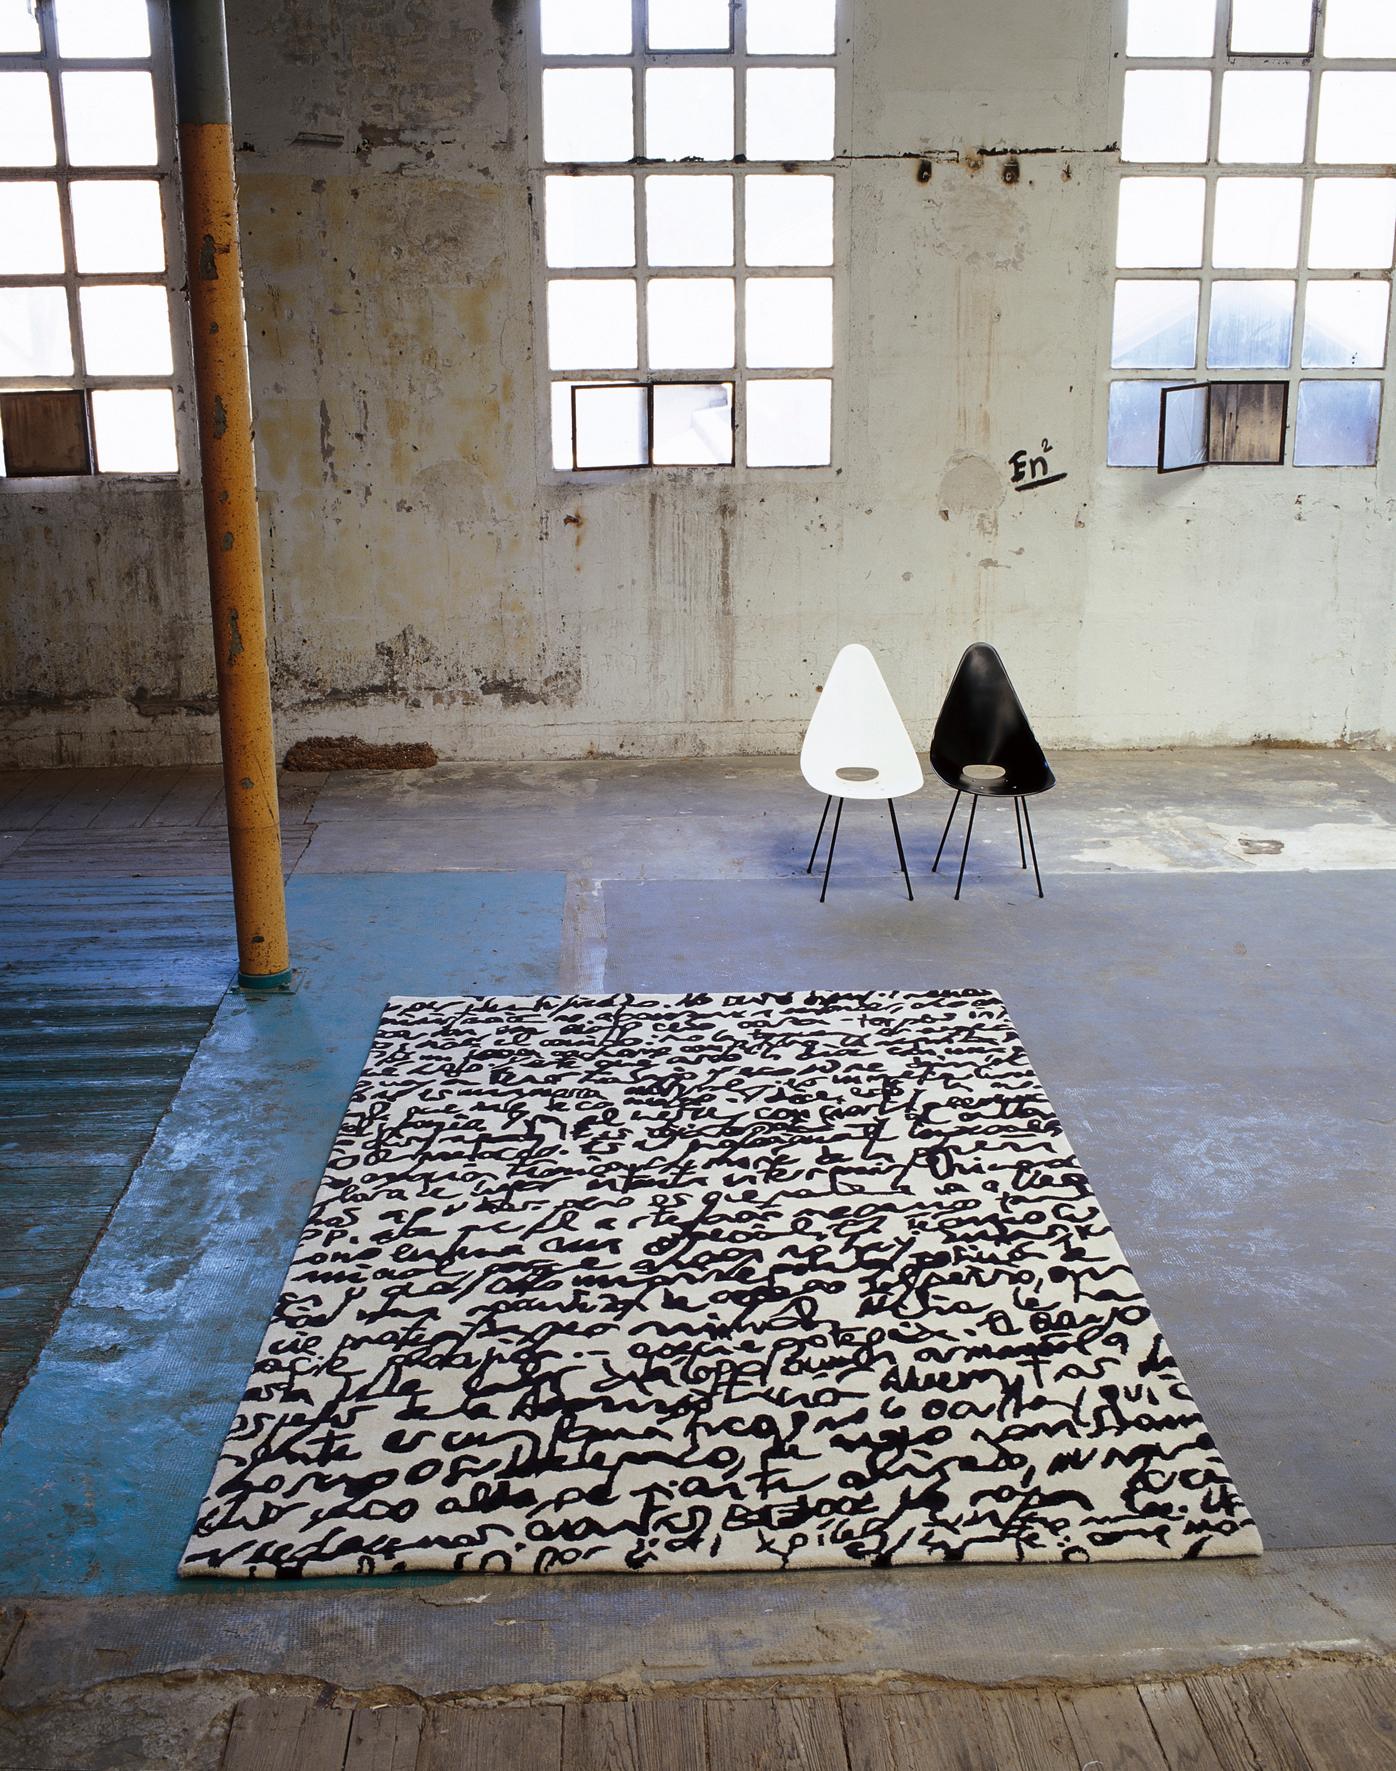 Hand-Tufted 'Manuscrit' Runner by Joaquim Ruiz Millet for Nanimarquina.

Executed in 100% hand-tufted New Zealand wool. The absence of color makes each of these rugs a dichotomy, a canvas in its own right. The stark contrast of black and white